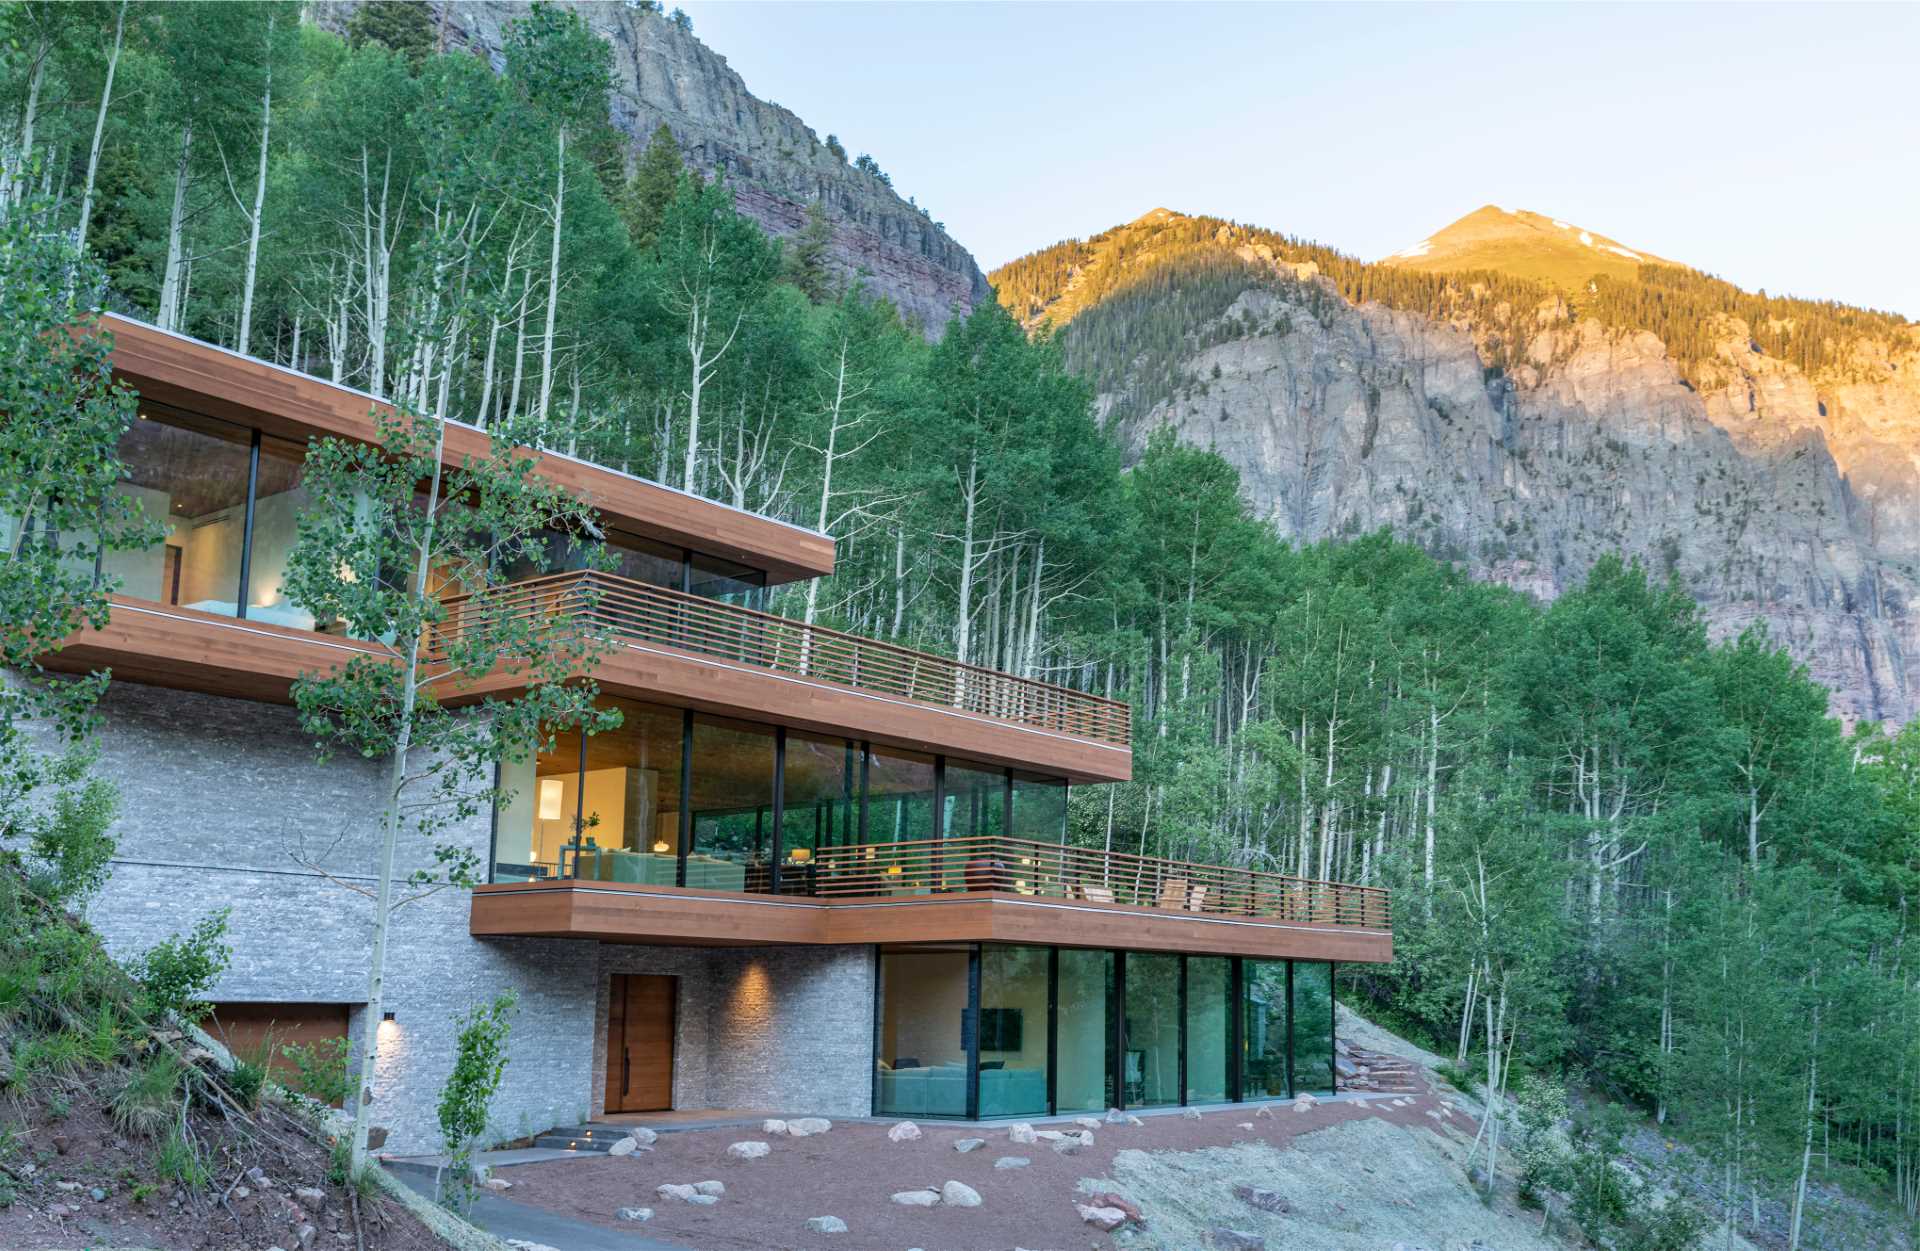 A modern home nestled into the steep cliffs appears as three cantilevered glass boxes.